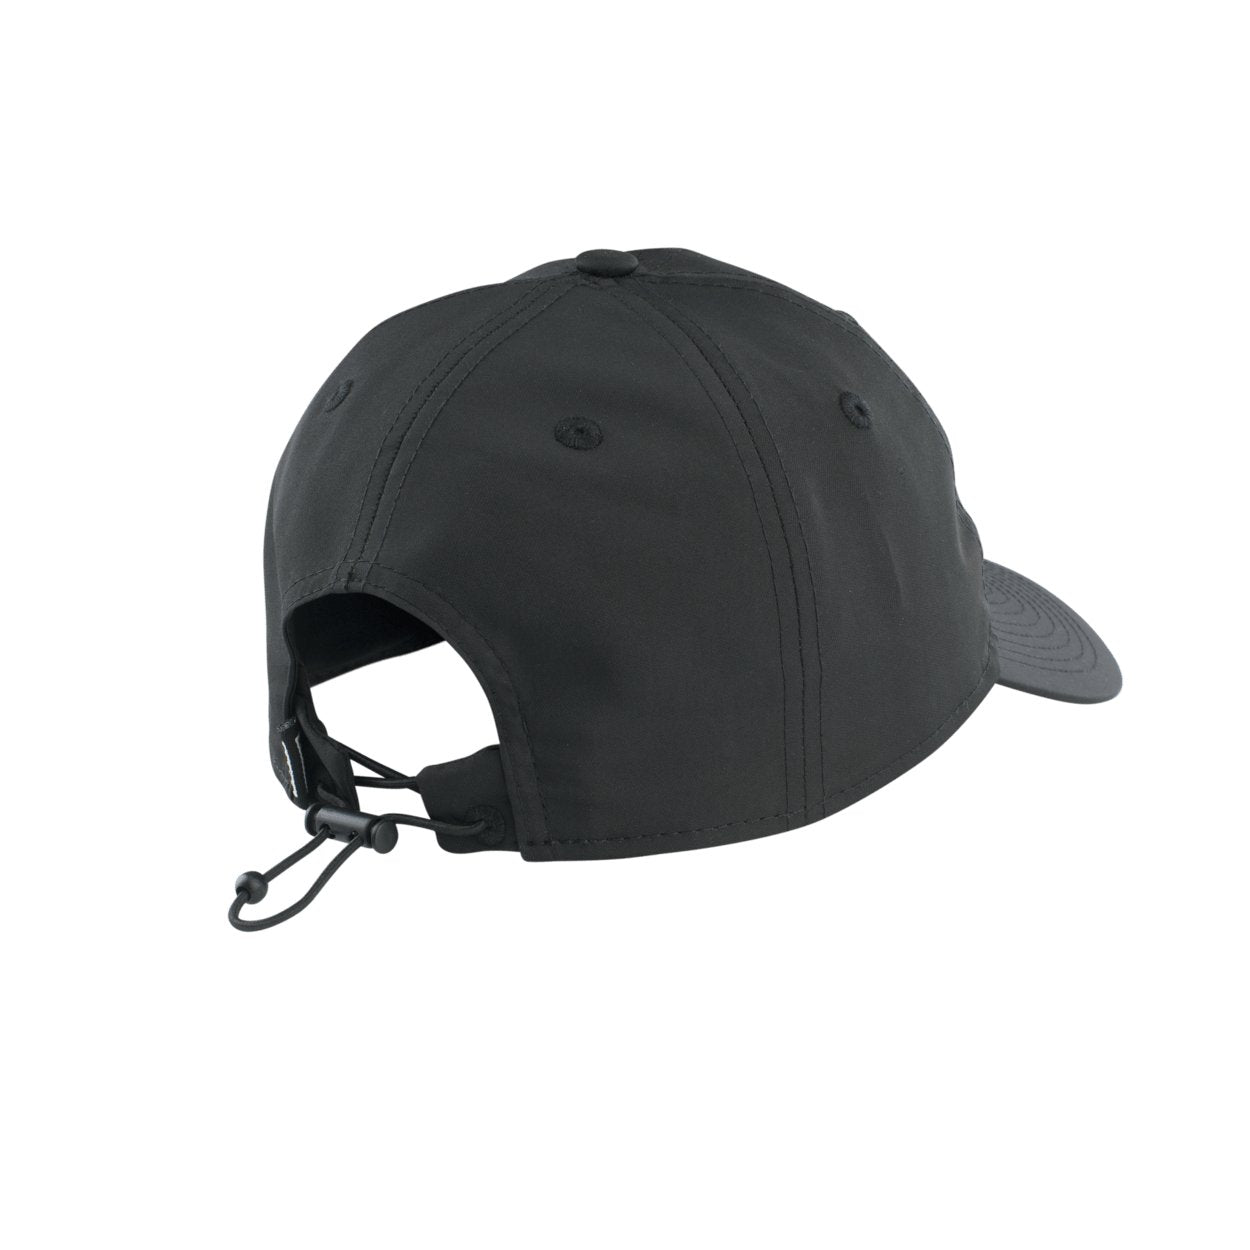 ION Cap Session 2023 - Worthing Watersports - 9010583119830 - Apparel - ION Bike